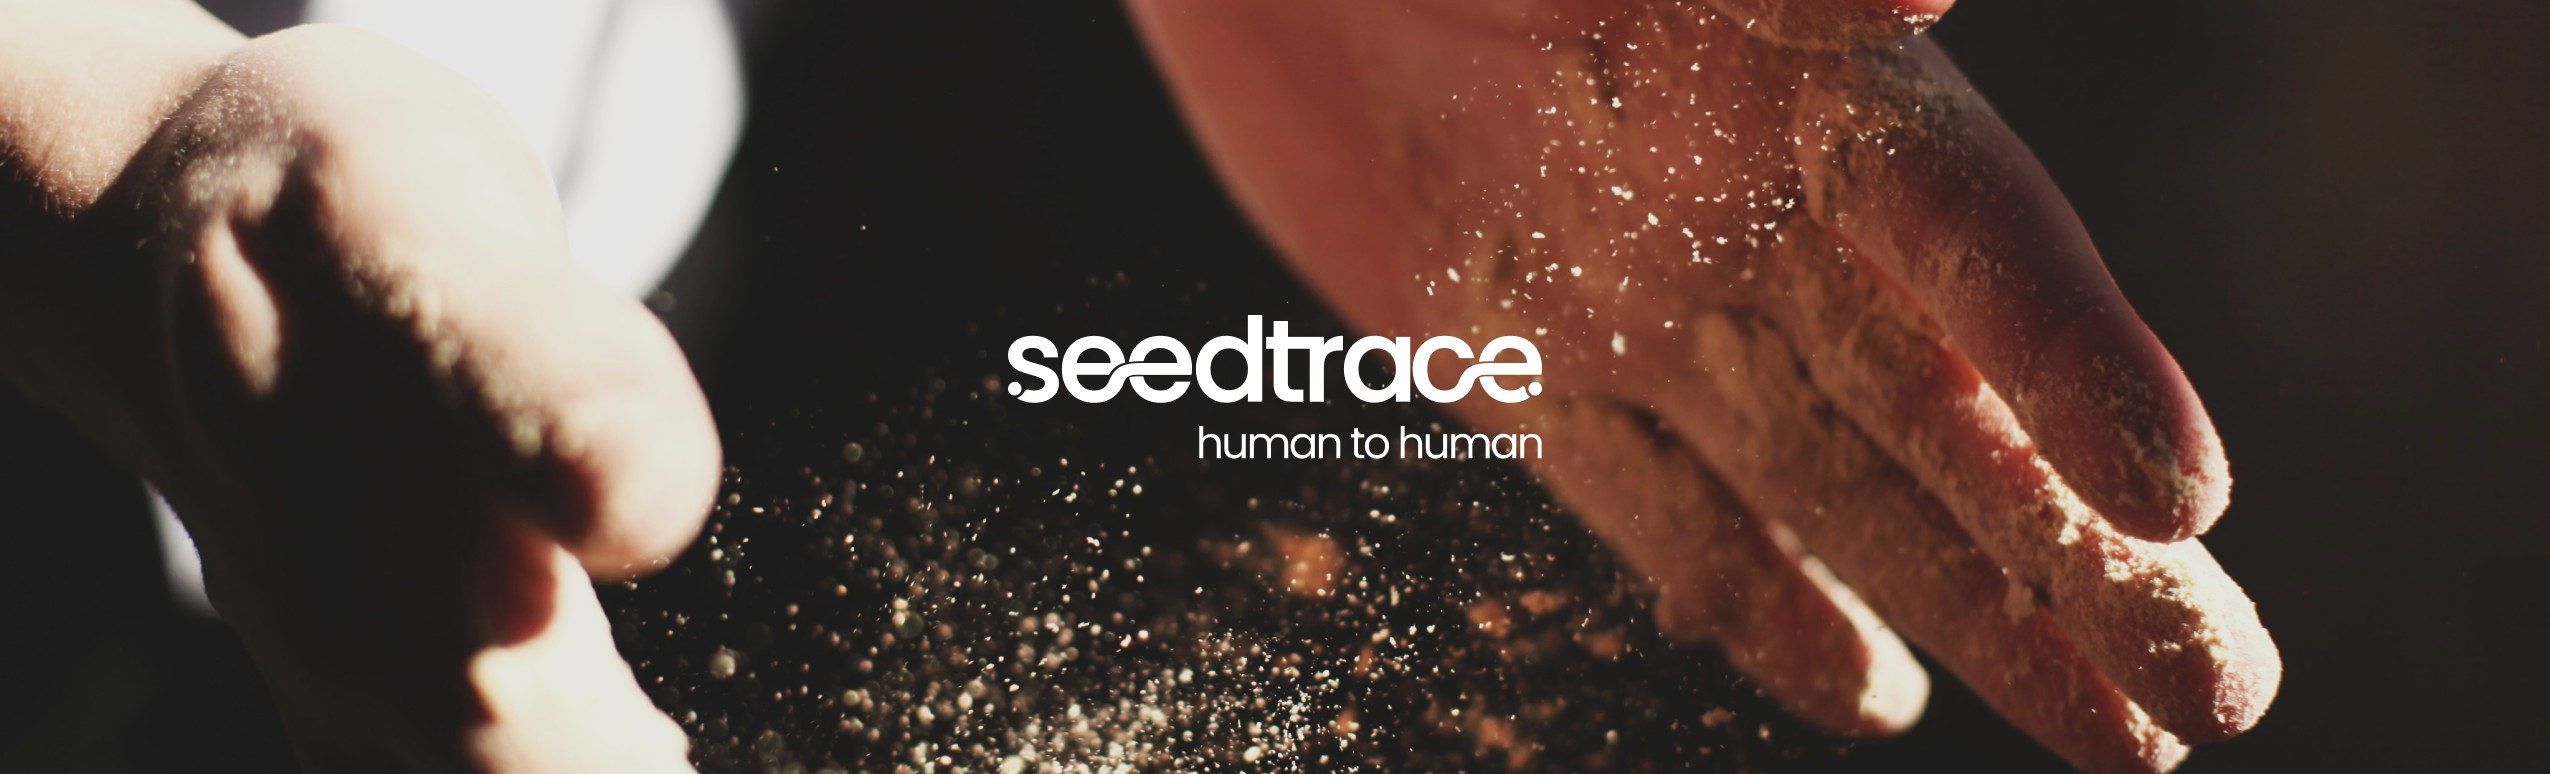 seedtrace / startup from Berlin / Background